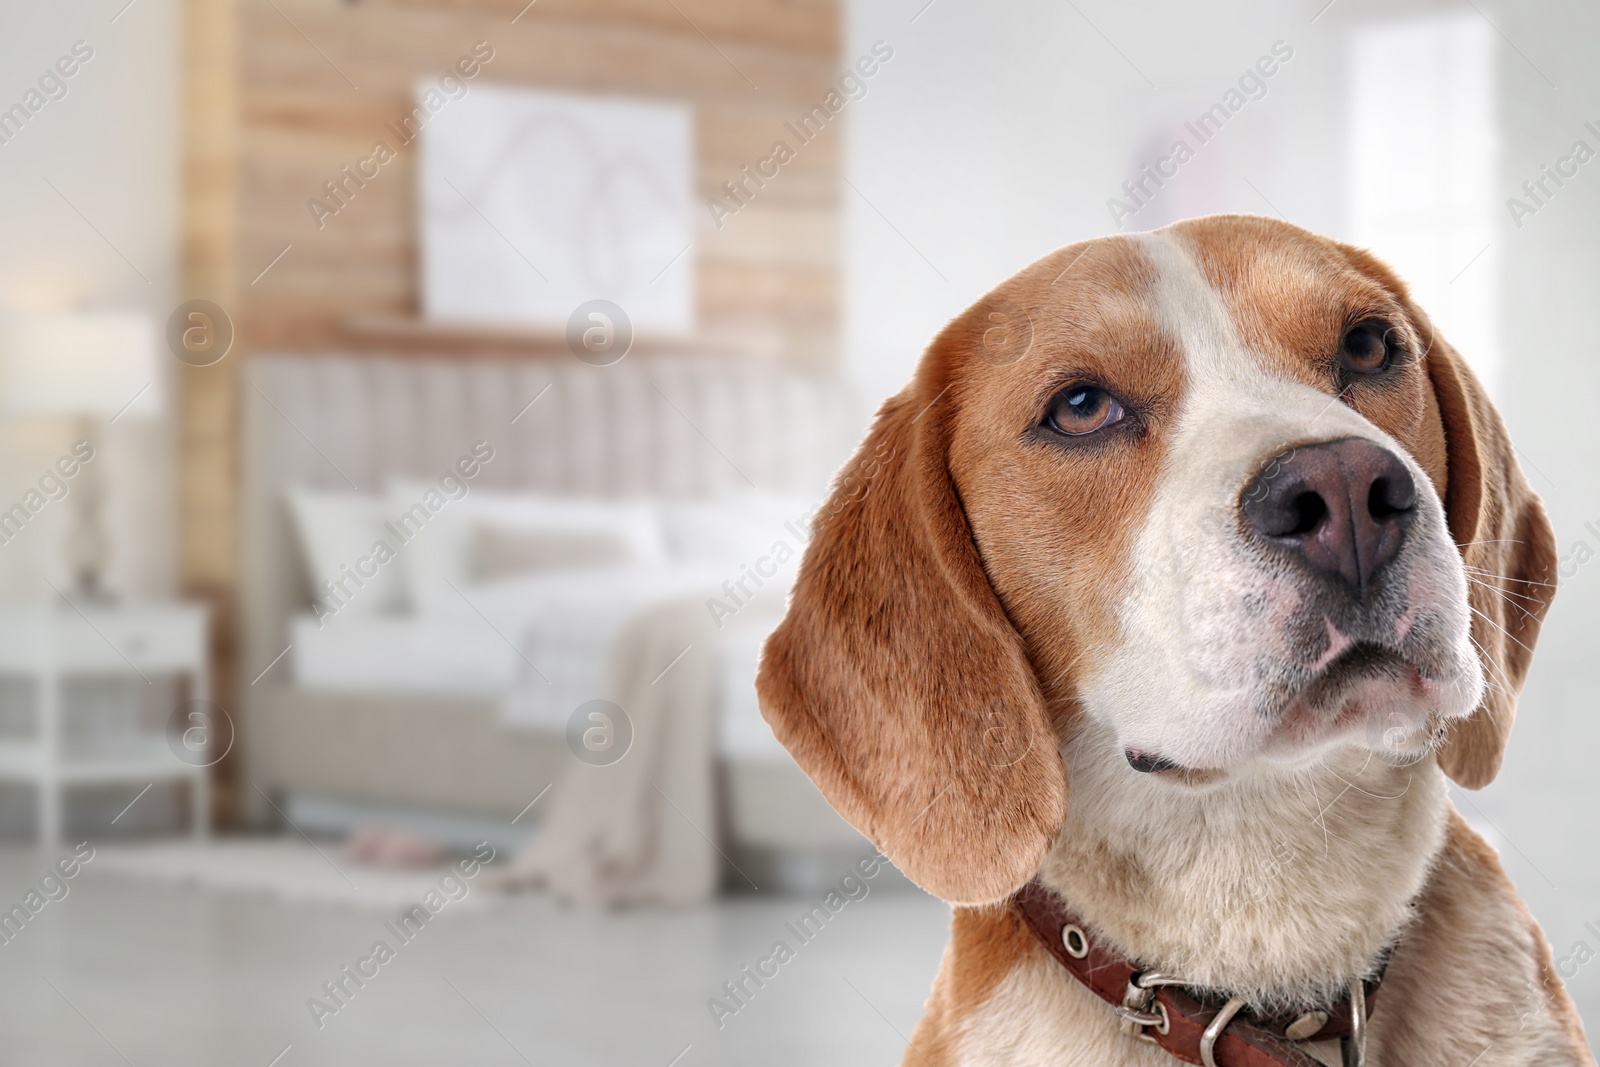 Image of Cute dog in bedroom, space for text. Pet friendly hotel